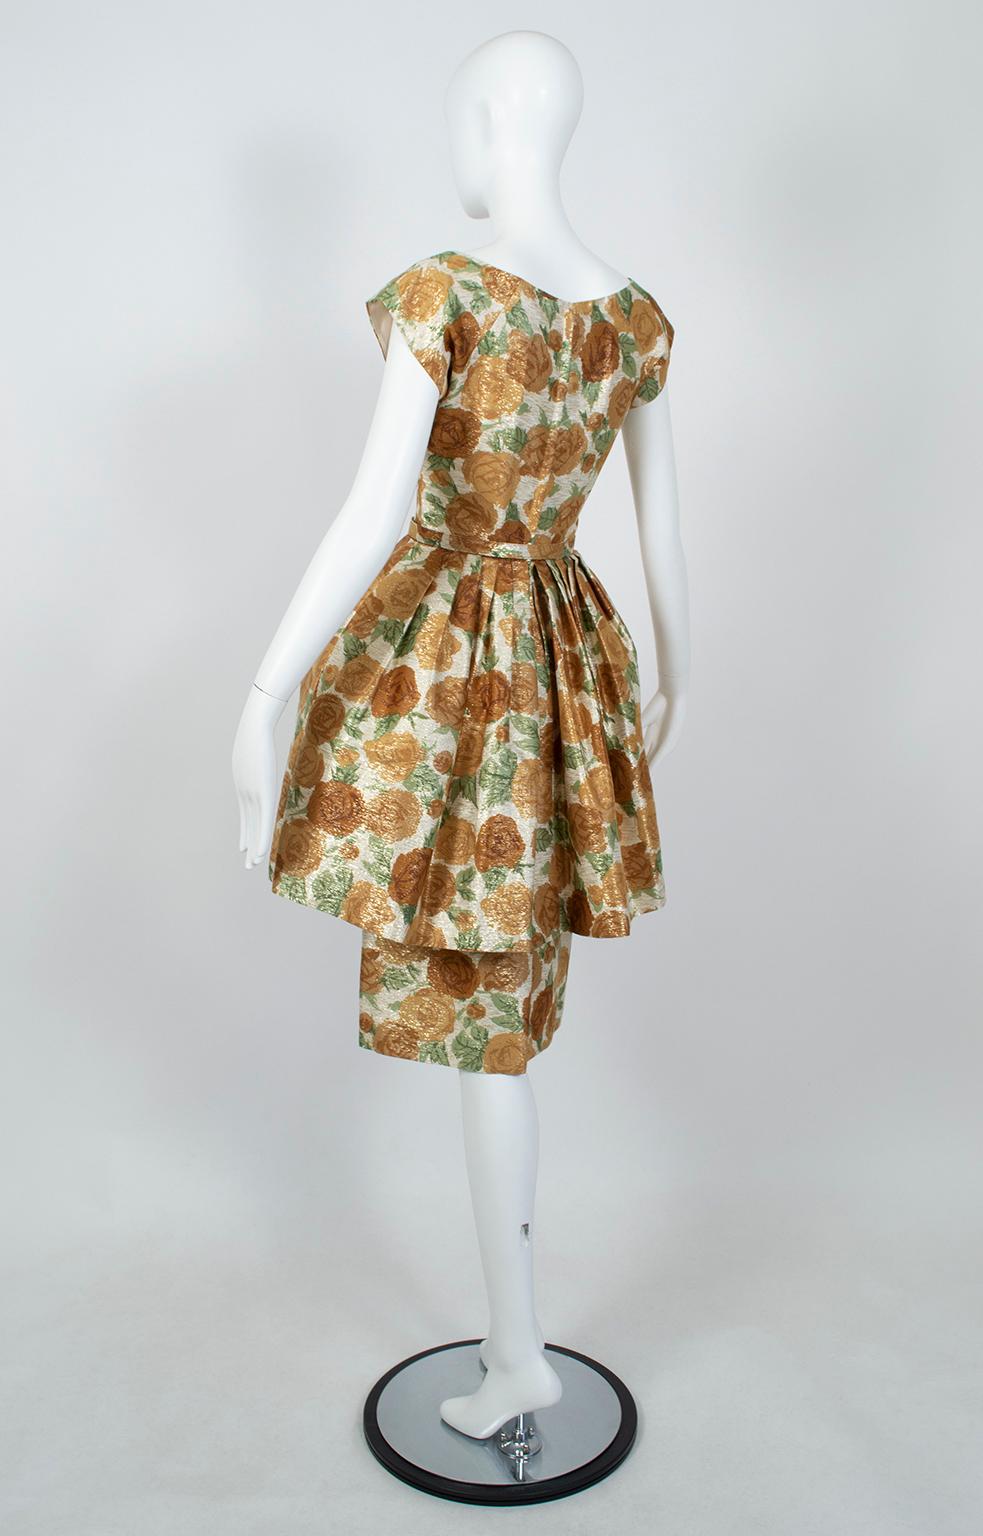 From the estate of a mid-century opera singer comes this New Look party dress, which looks like it might have stepped out of a Henry Clarke fashion shoot. High fashion touches like bust gathers and a deeply pleated Poiret-style lampshade peplum